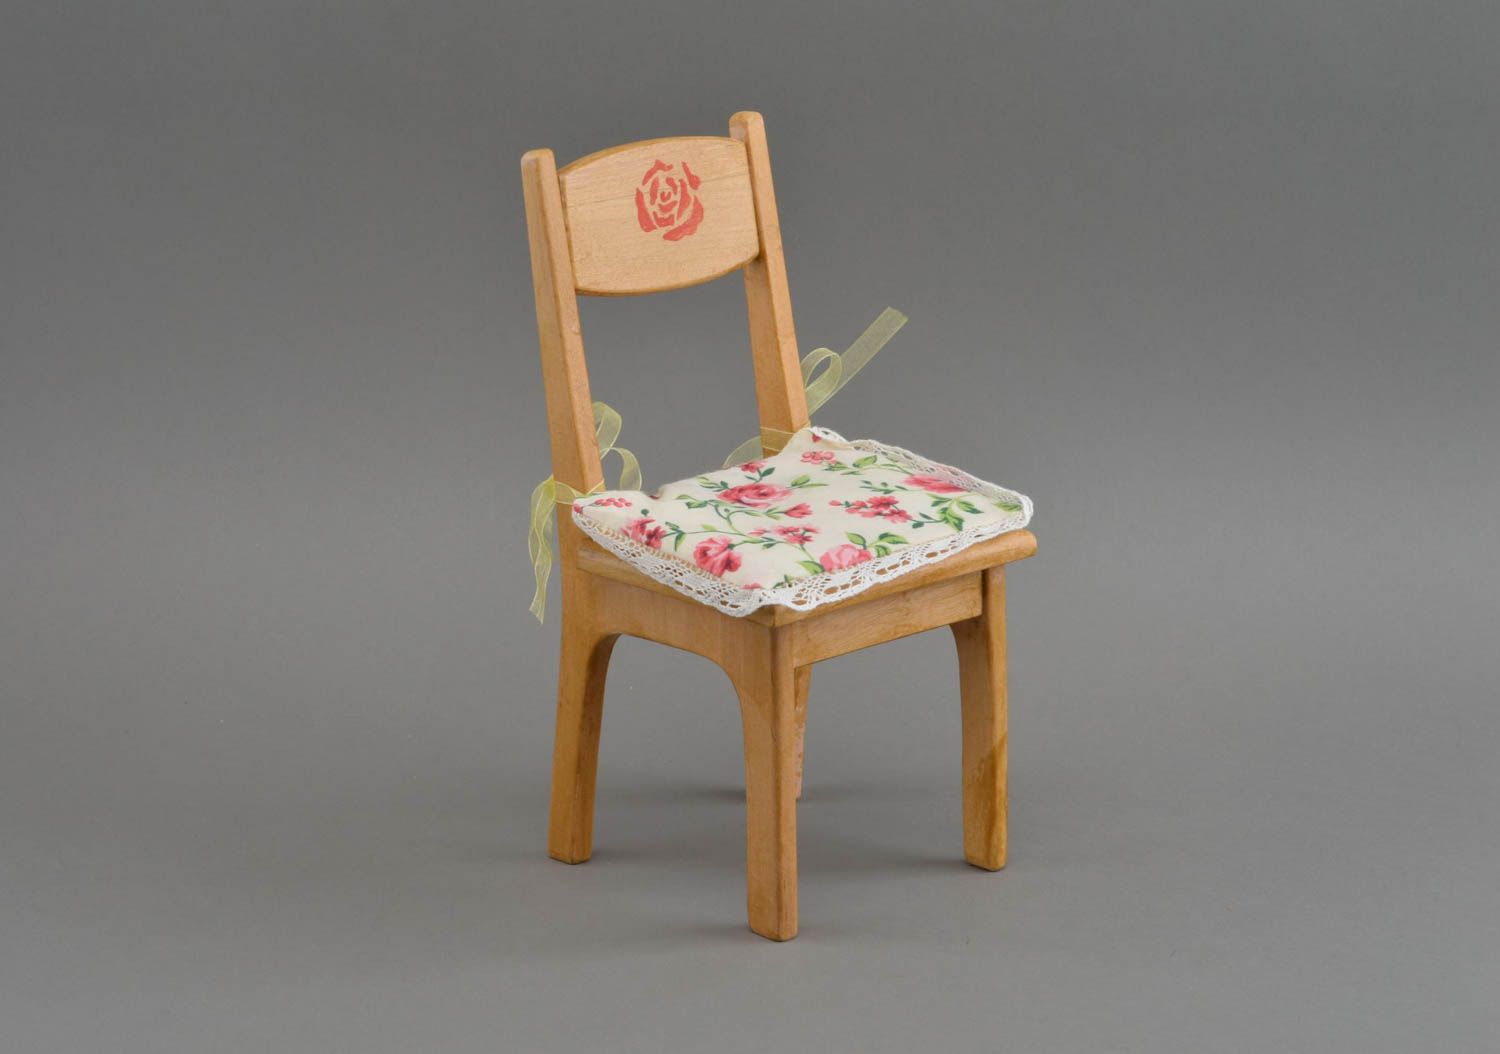 Chair pad for doll furniture handmade doll furniture present for children photo 1